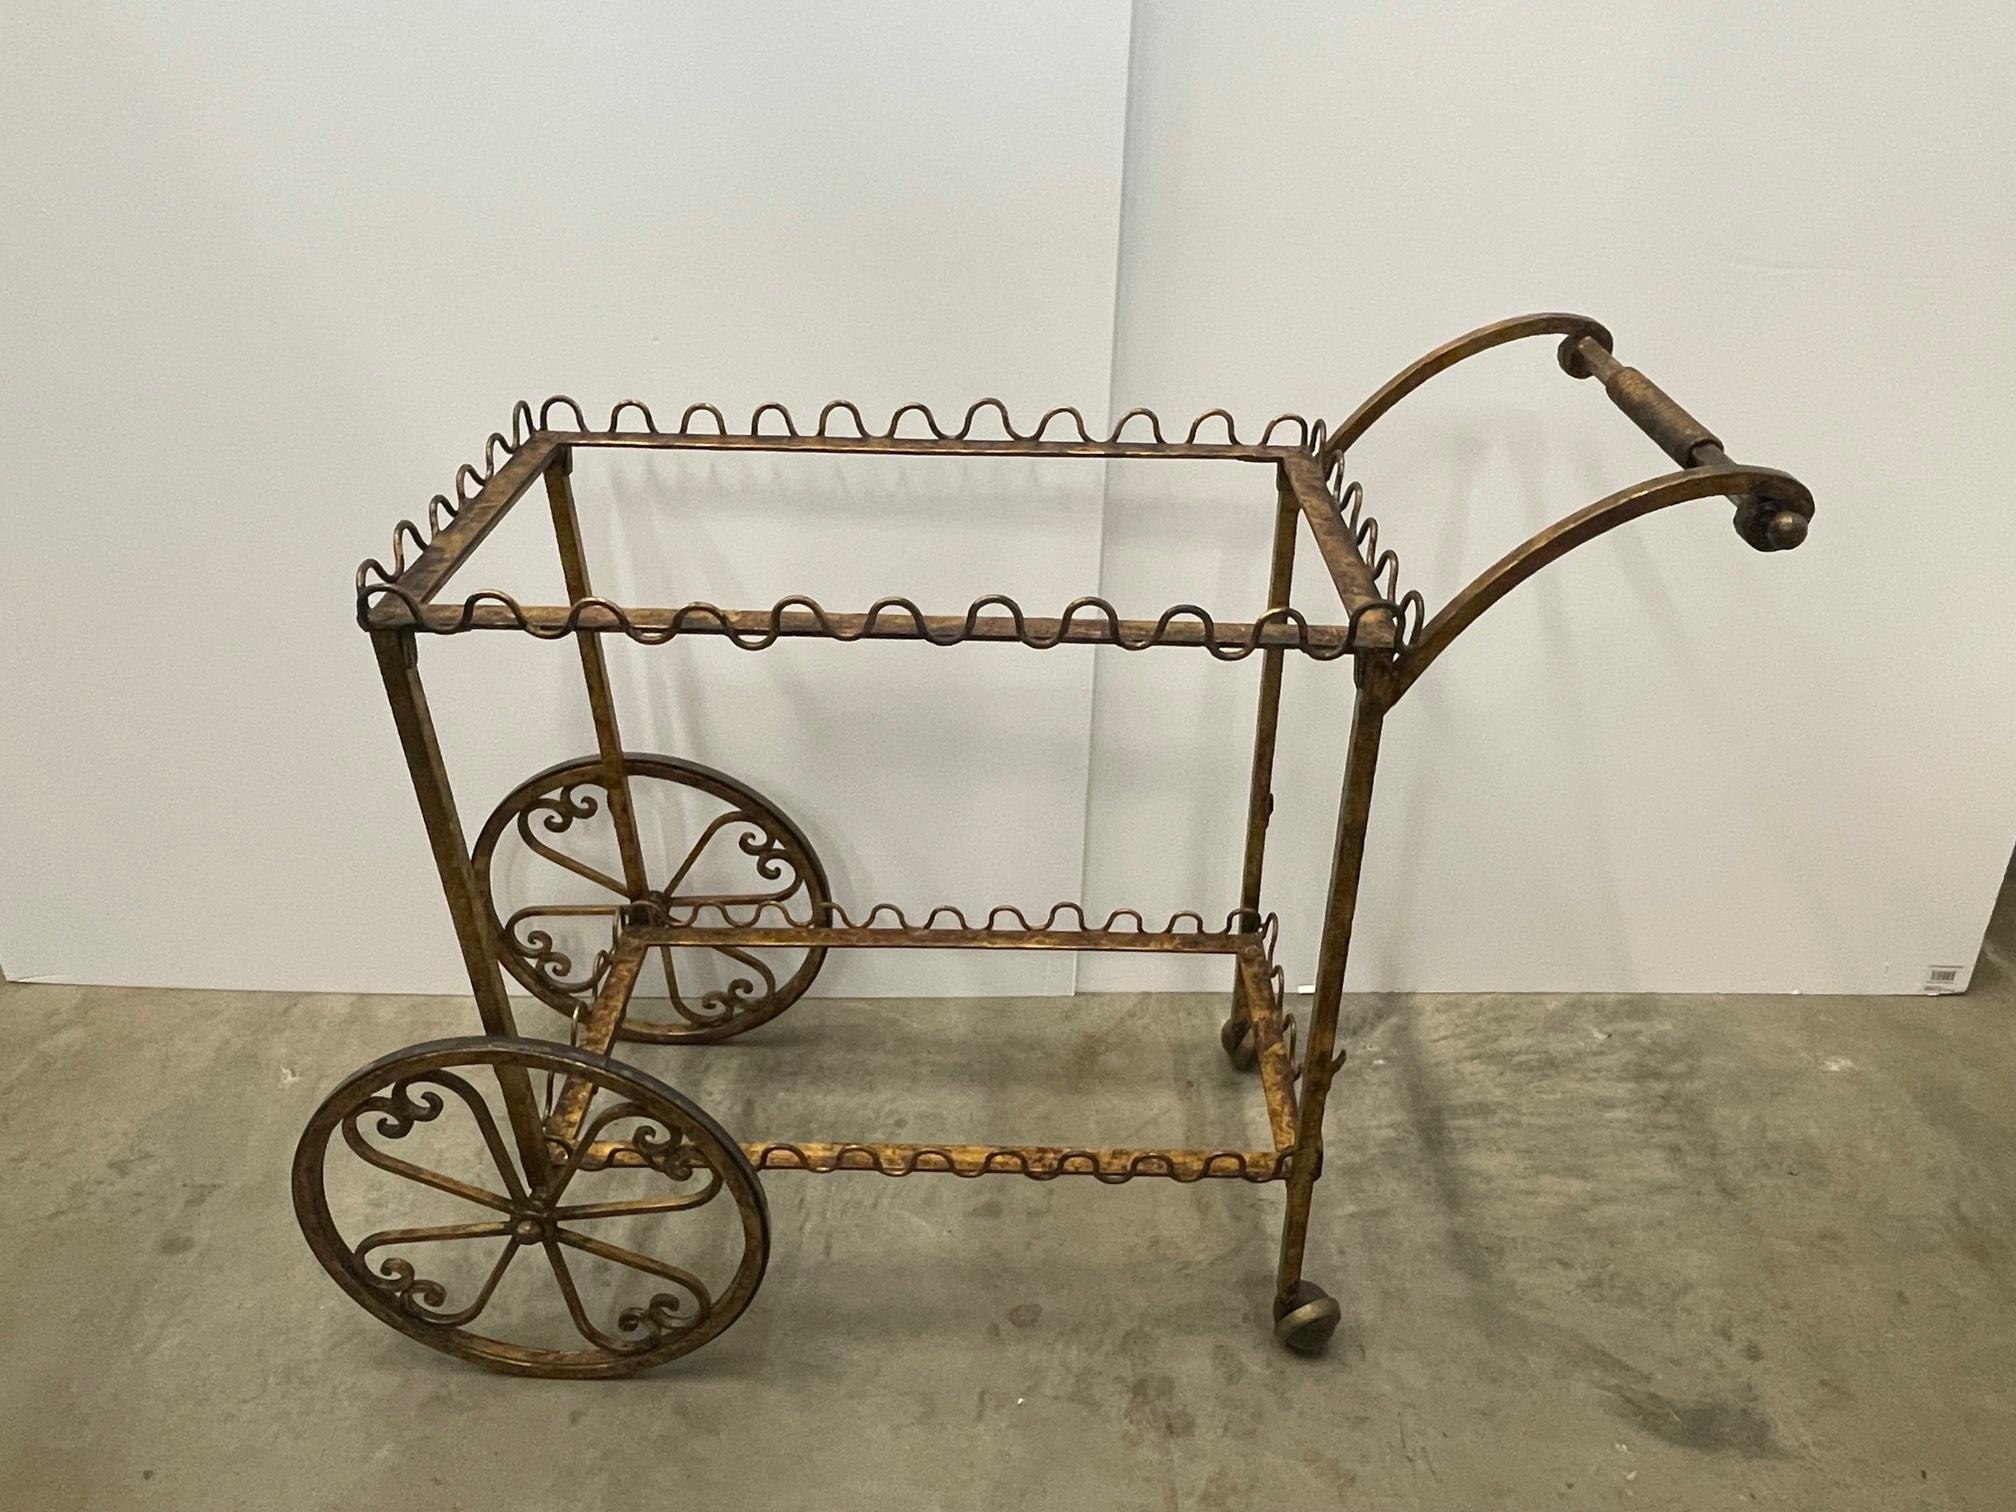 An unusual form and particularly elegant French gilt iron mid century modern bar cart having two tiers with decorative wave like galleries around the periphery. Top shelf is clear glass; bottom shelf is aged mirror. Wheels are superbly decorative